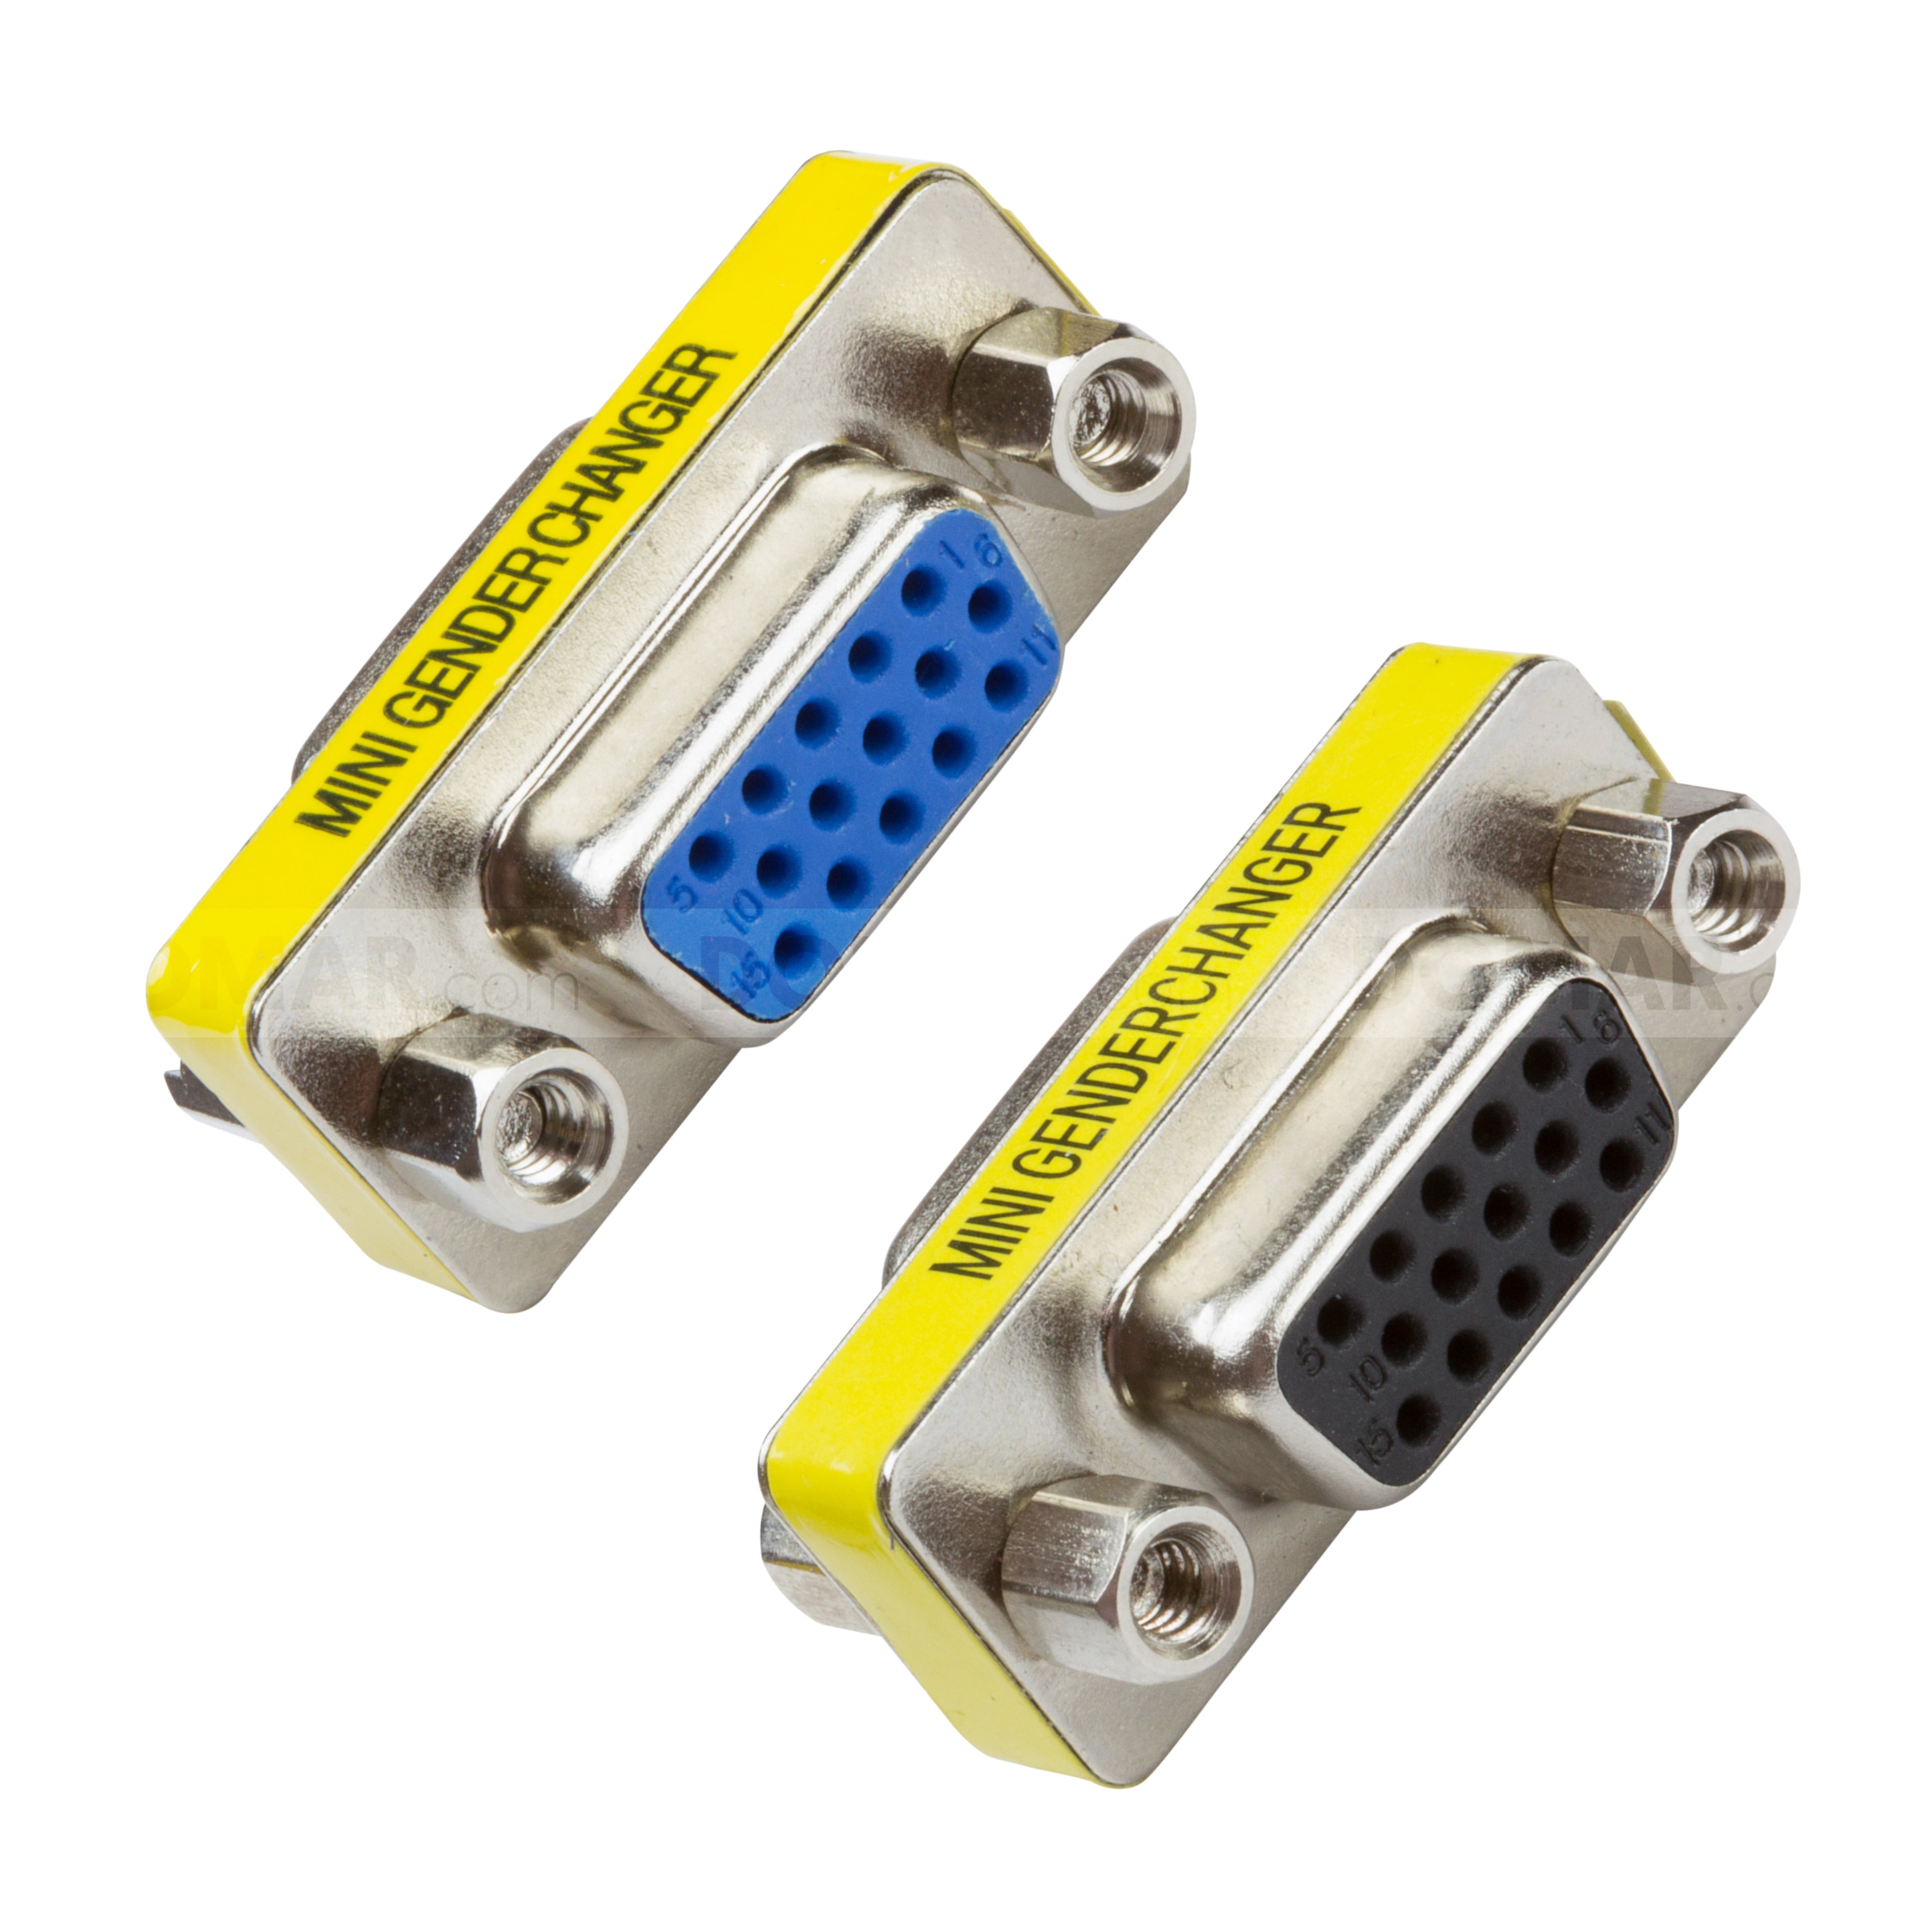 Zxtech 2 Pack of VGA Female Coupler for CCTV Cable